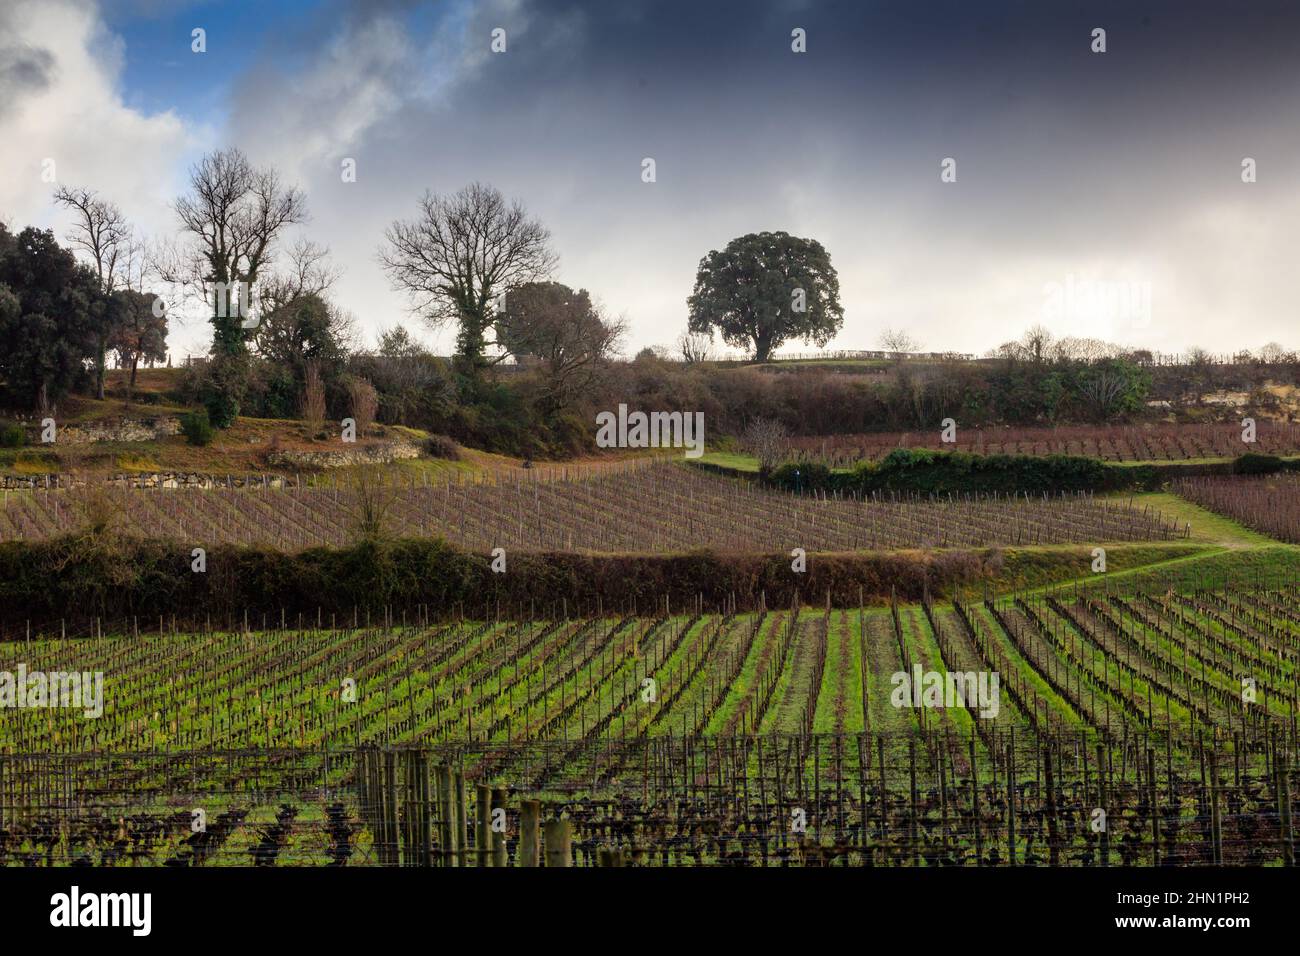 Vineyards in Saint Emilion a Unesco World Heritage site in the Bordeaux area. France. Stock Photo